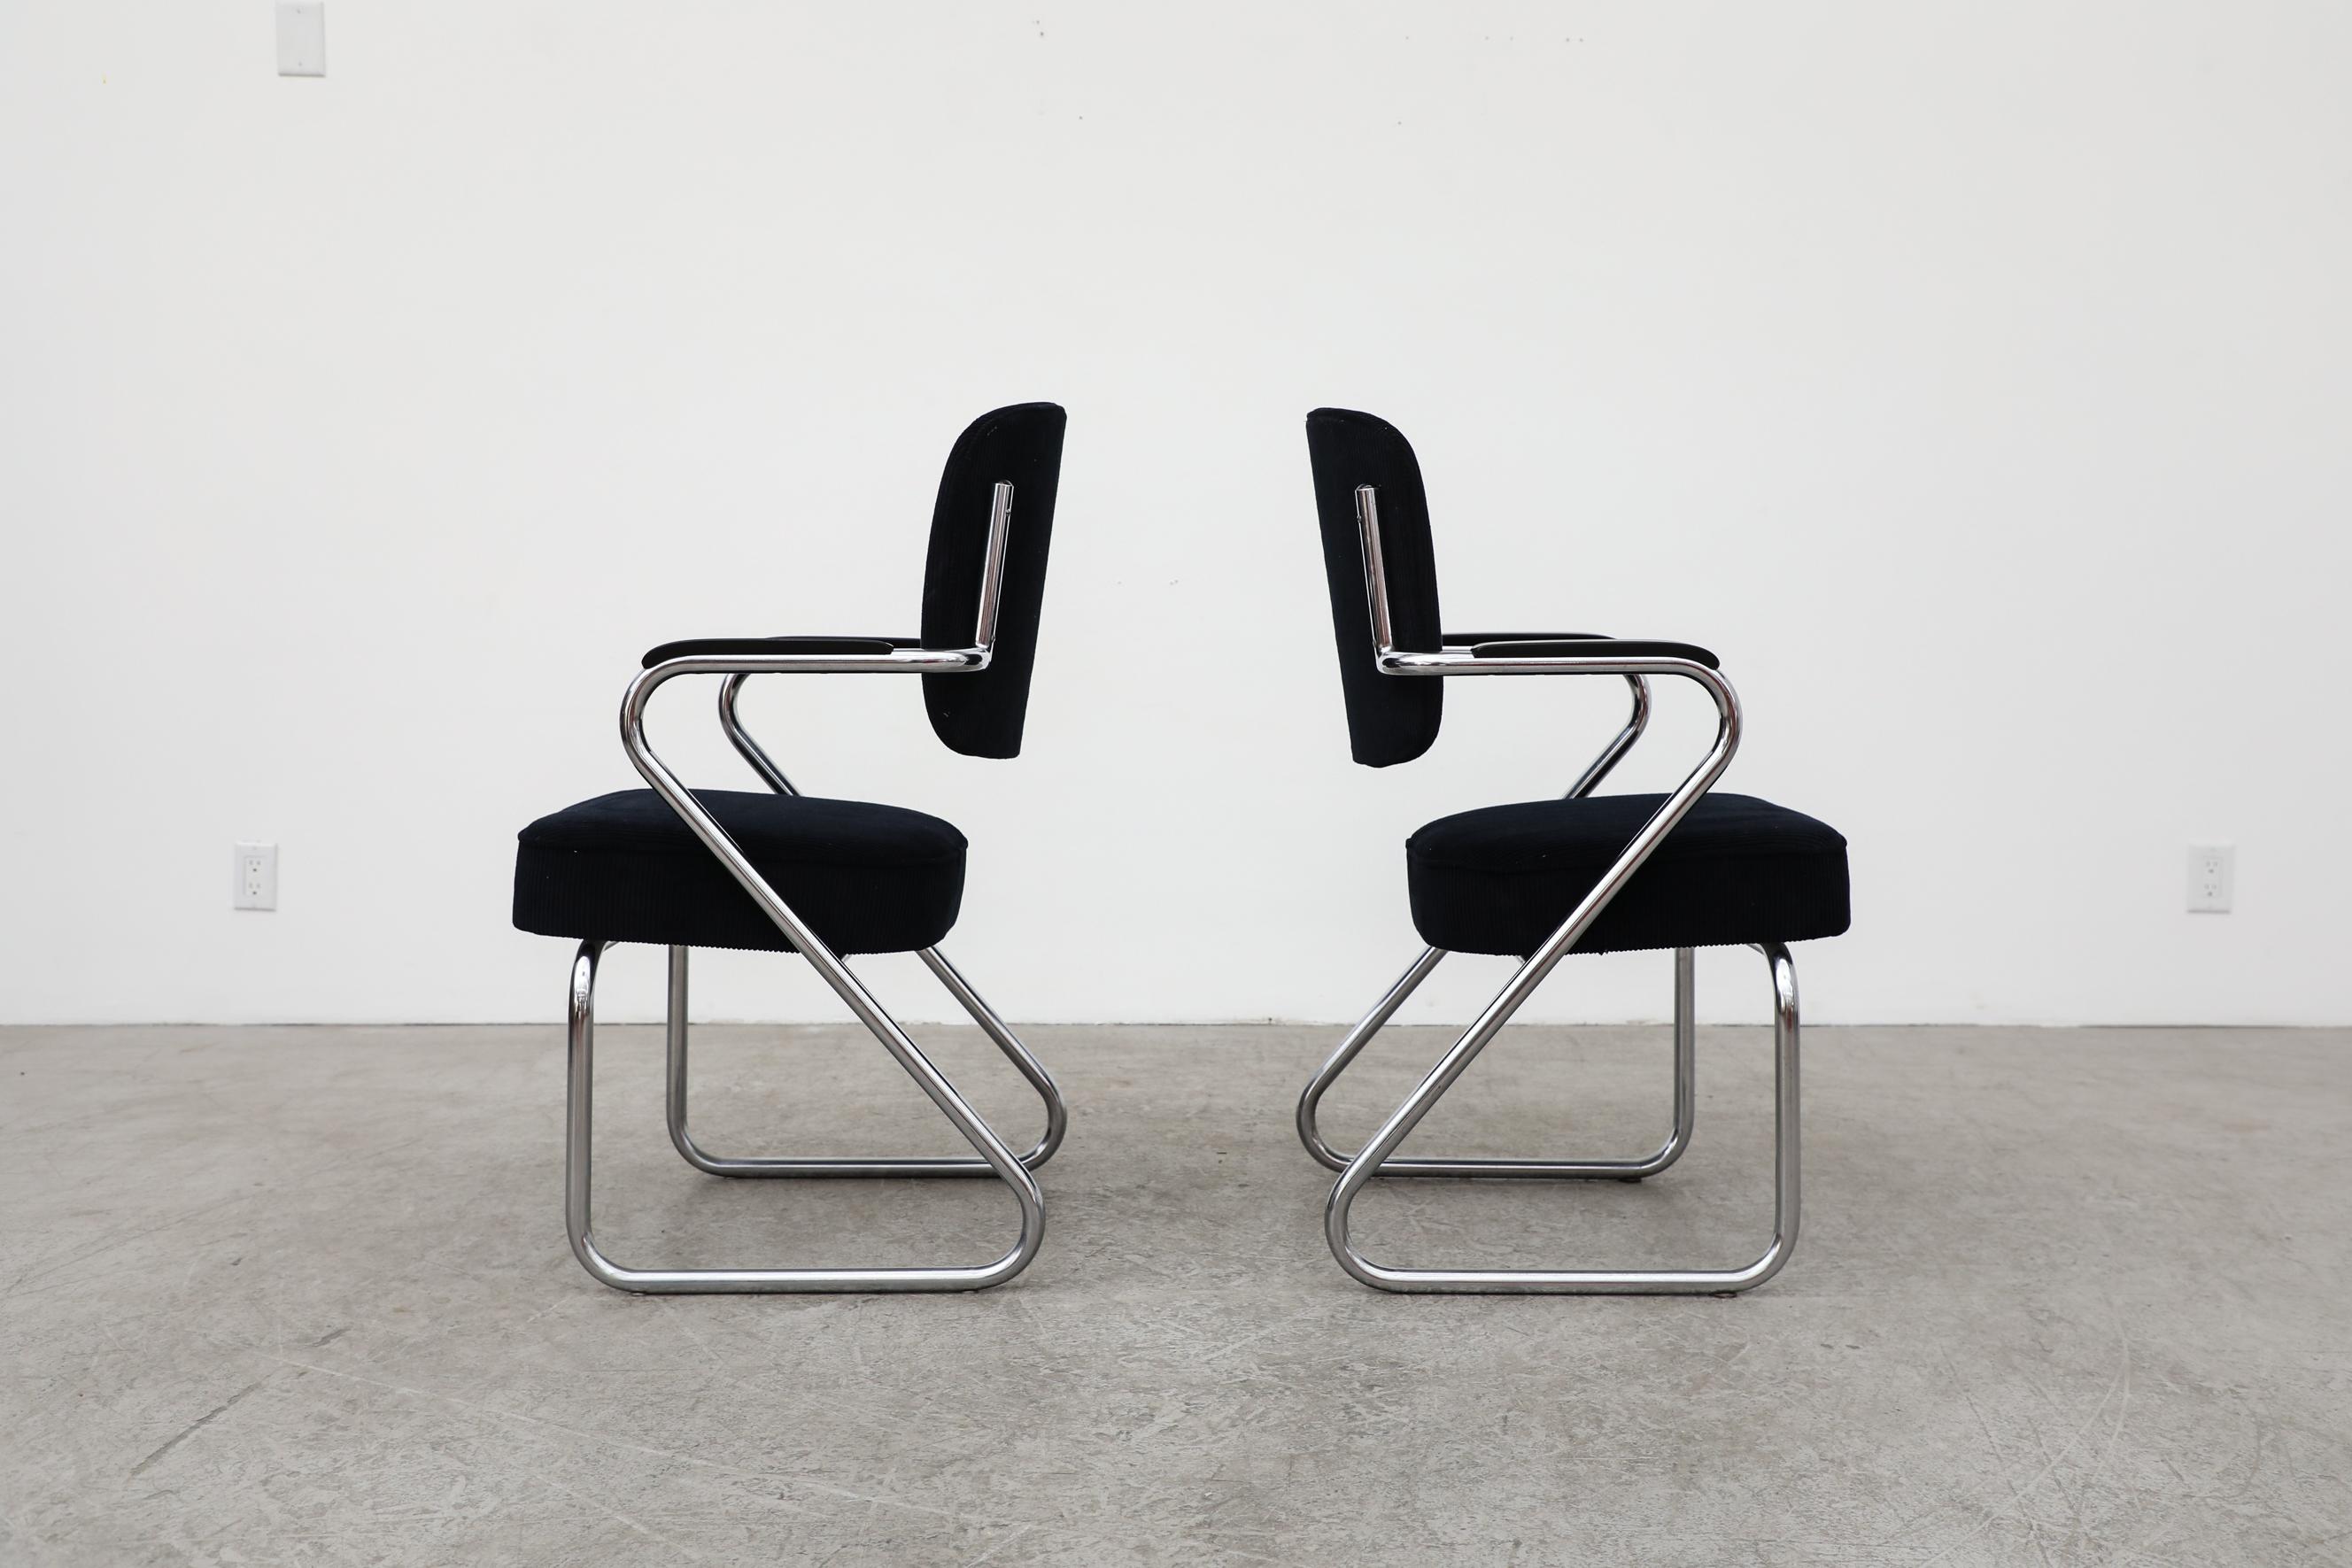 Corduroy Chairs by Paul Schuitema for Fana Metaal Rotterdam, 1950s In Good Condition For Sale In Los Angeles, CA